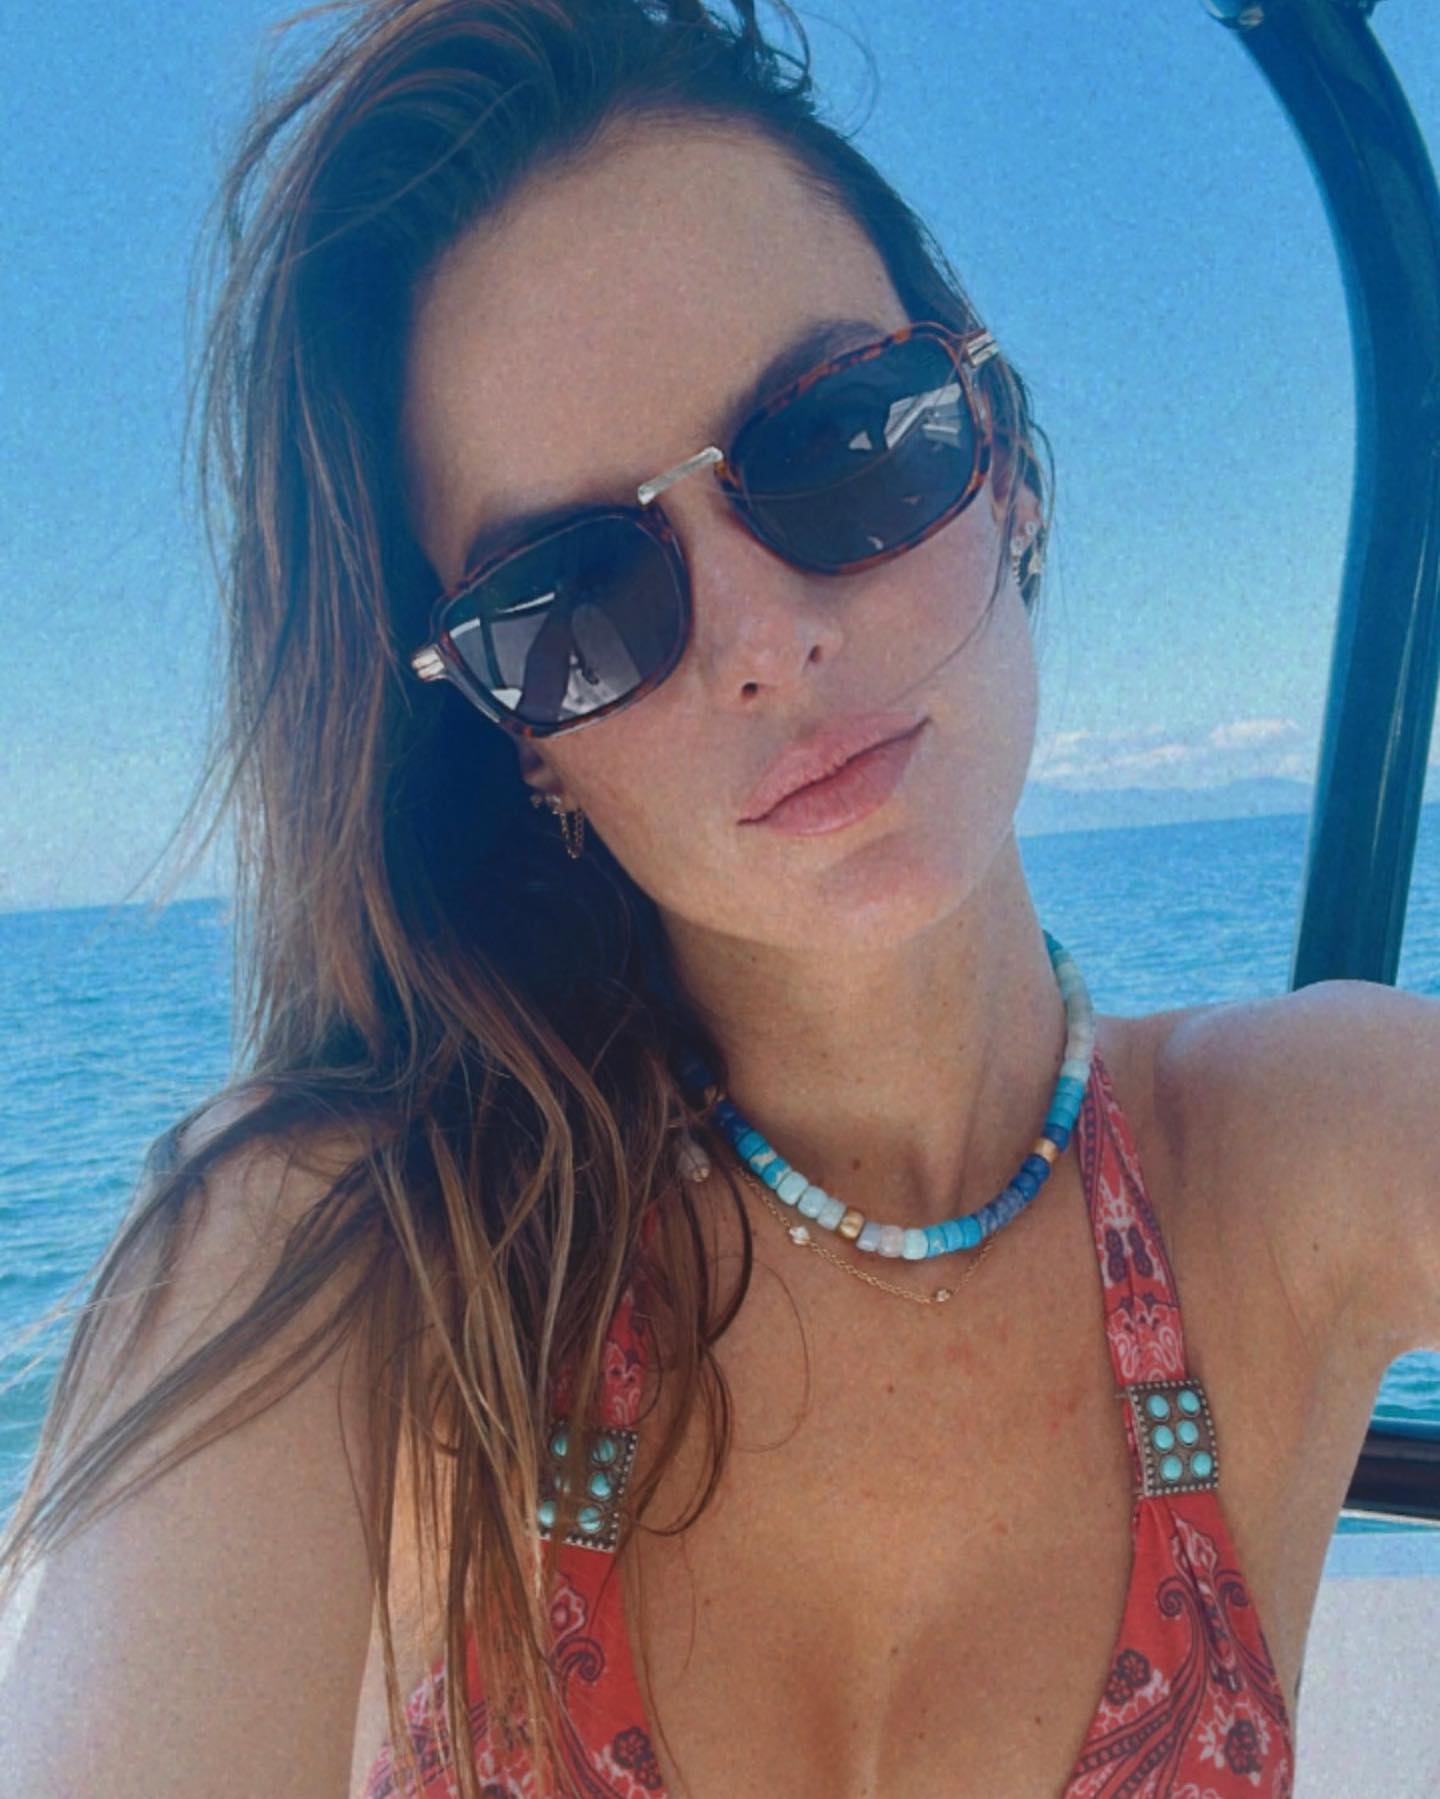 Photos n°11 : The Surf is Up for Alessandra Ambrosio!